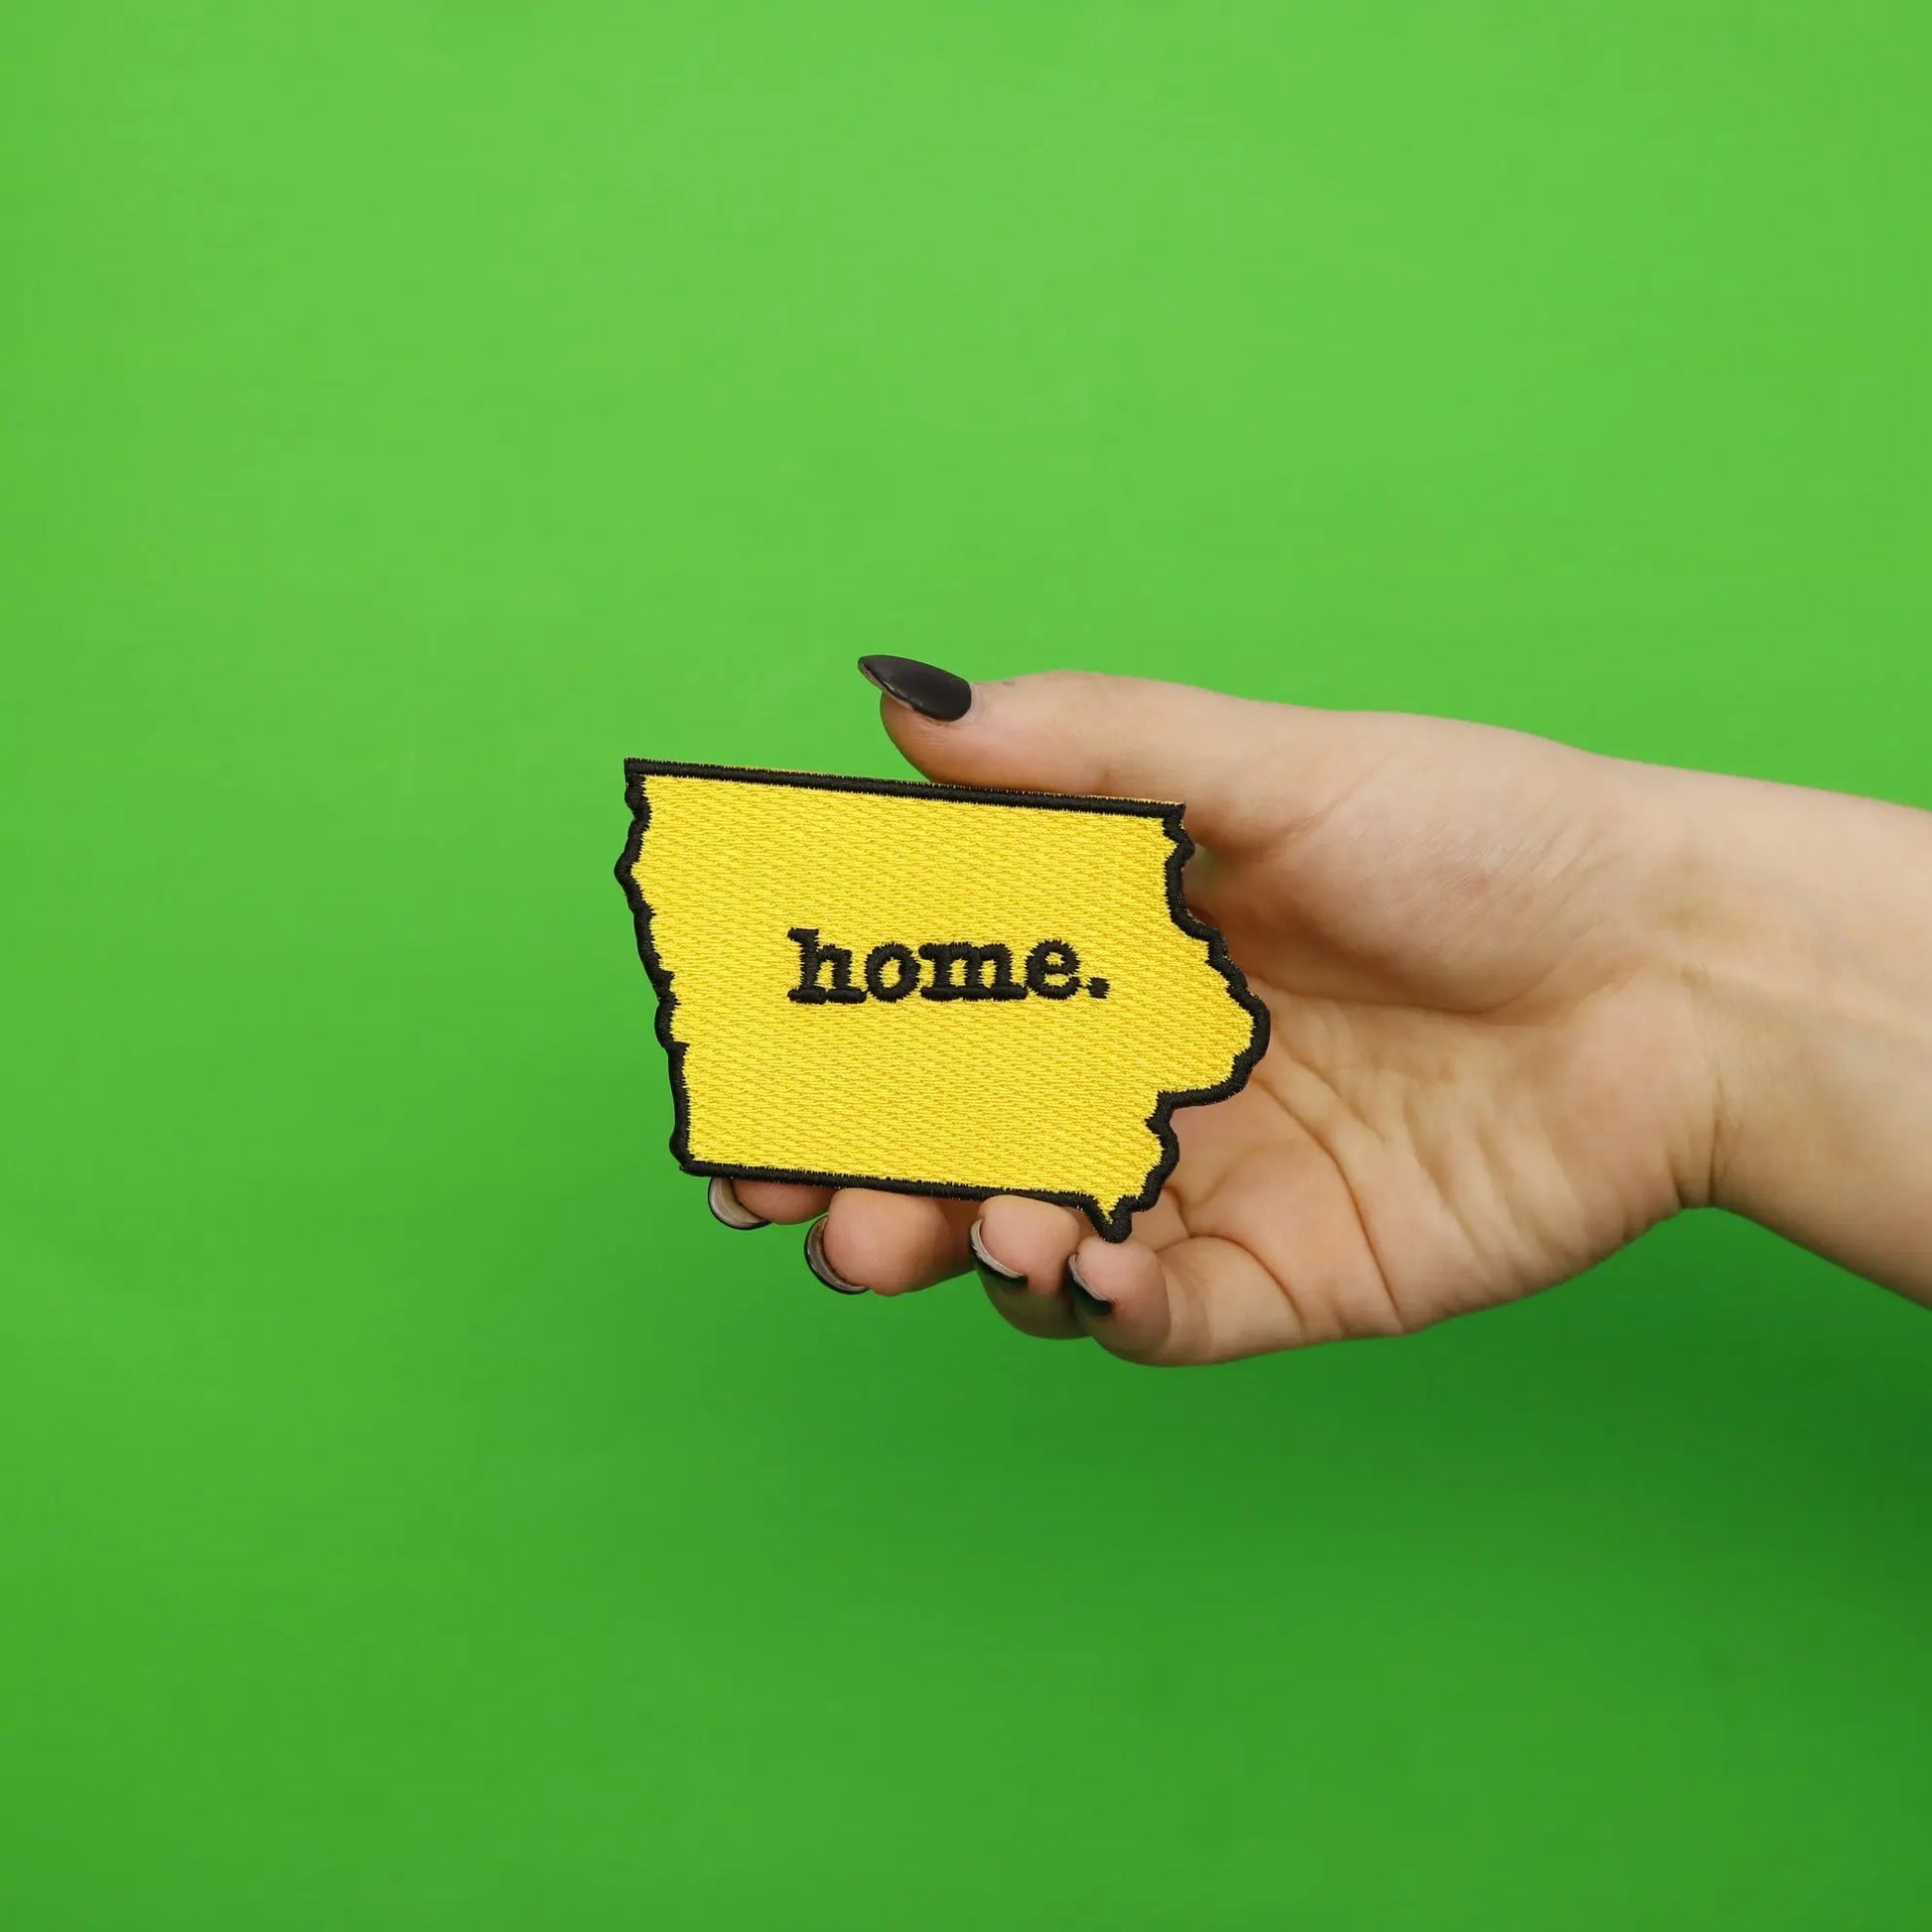 Iowa Home State Embroidered Iron On Patch 